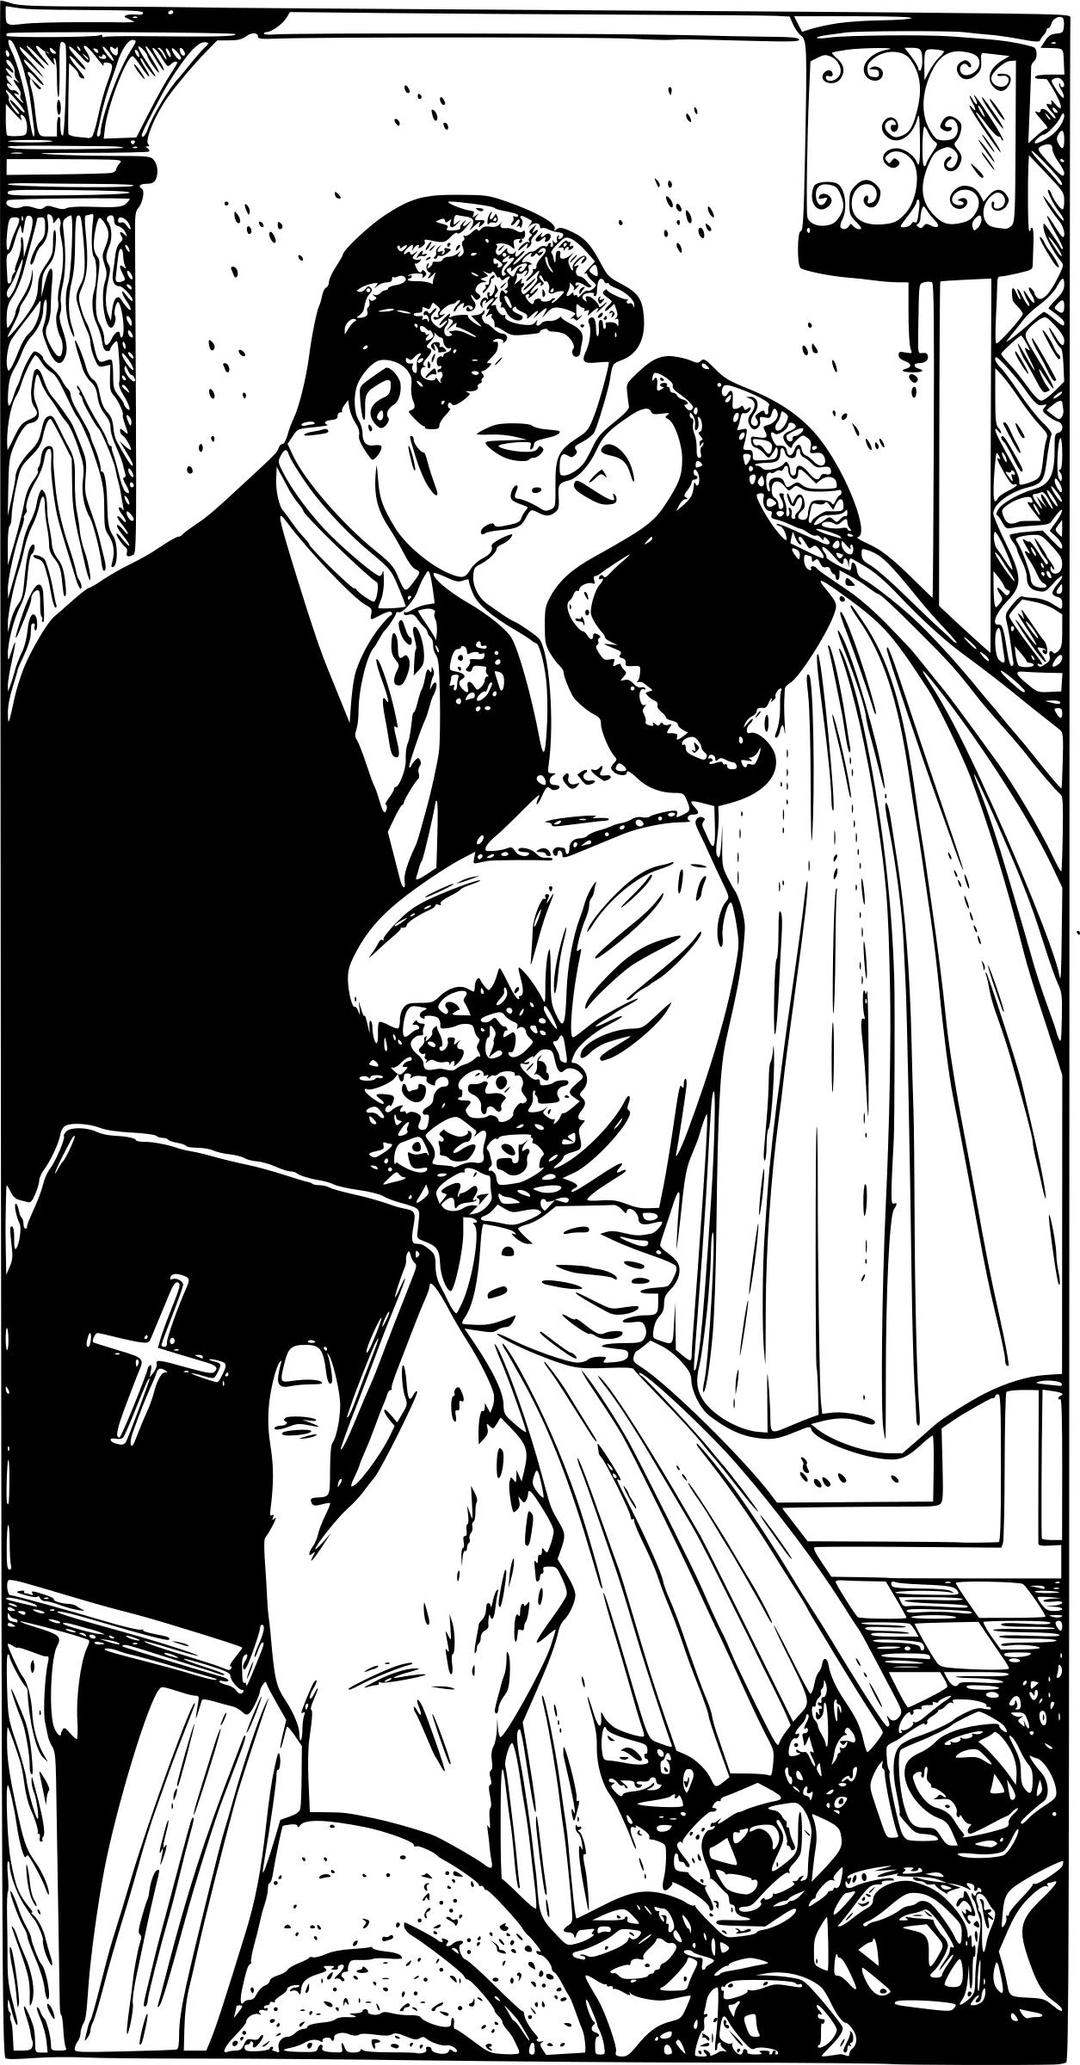 Stereotypical Wedding Kiss png transparent